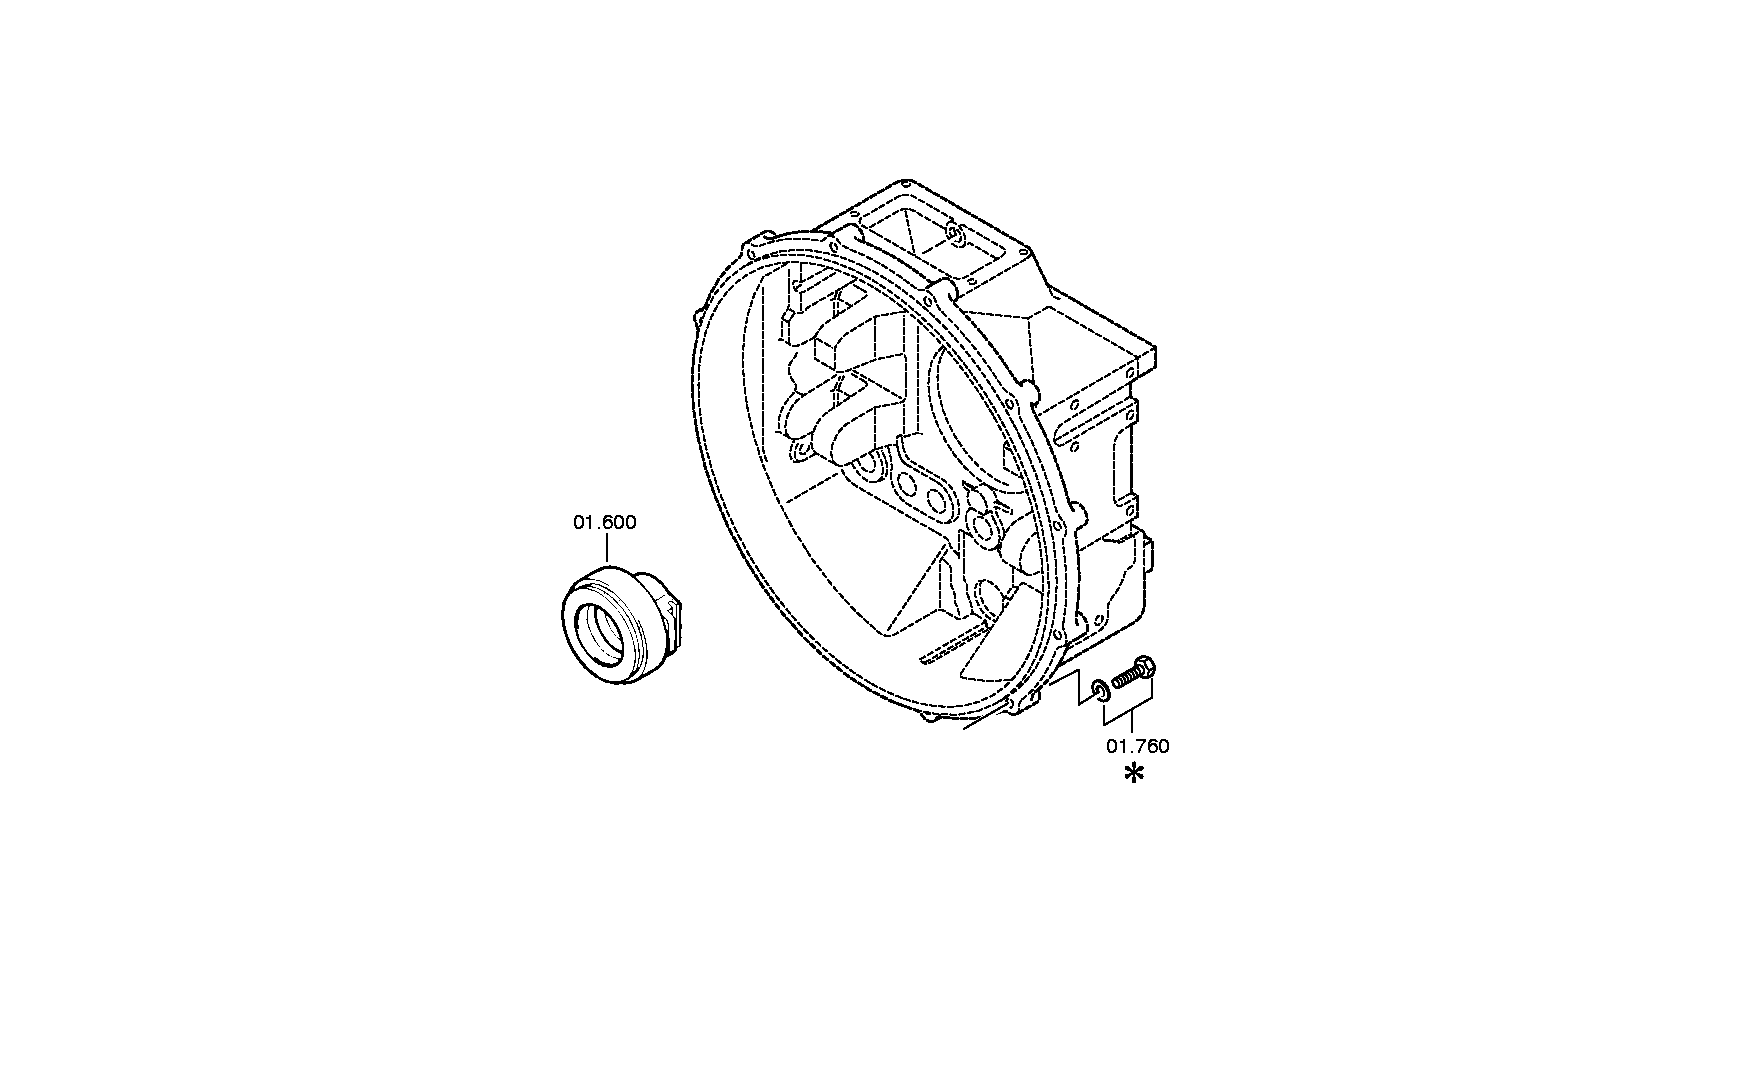 drawing for NISSAN MOTOR CO. 501006795 - CLUTCH CYLINDER (figure 1)